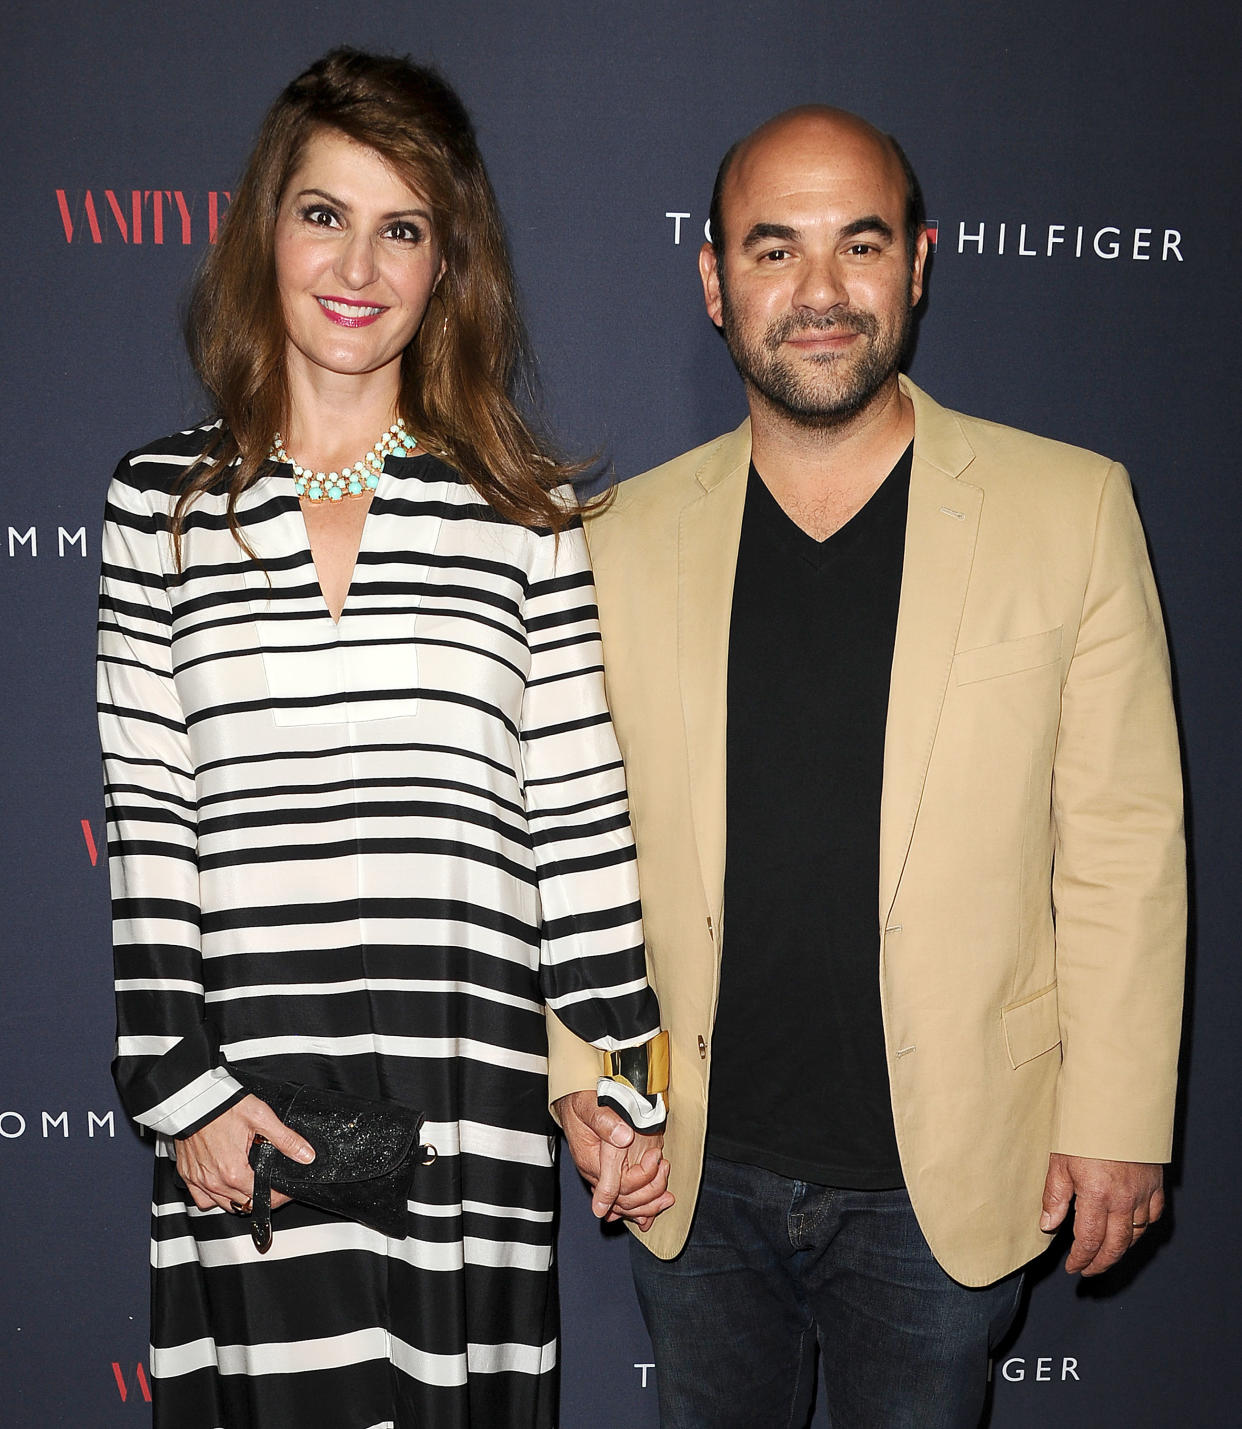 Nia Vardalos and Ian Gomez attend a Tommy Hilfiger event on April 9, 2014 in West Hollywood, Calif. (Photo: Jason LaVeris/FilmMagic)